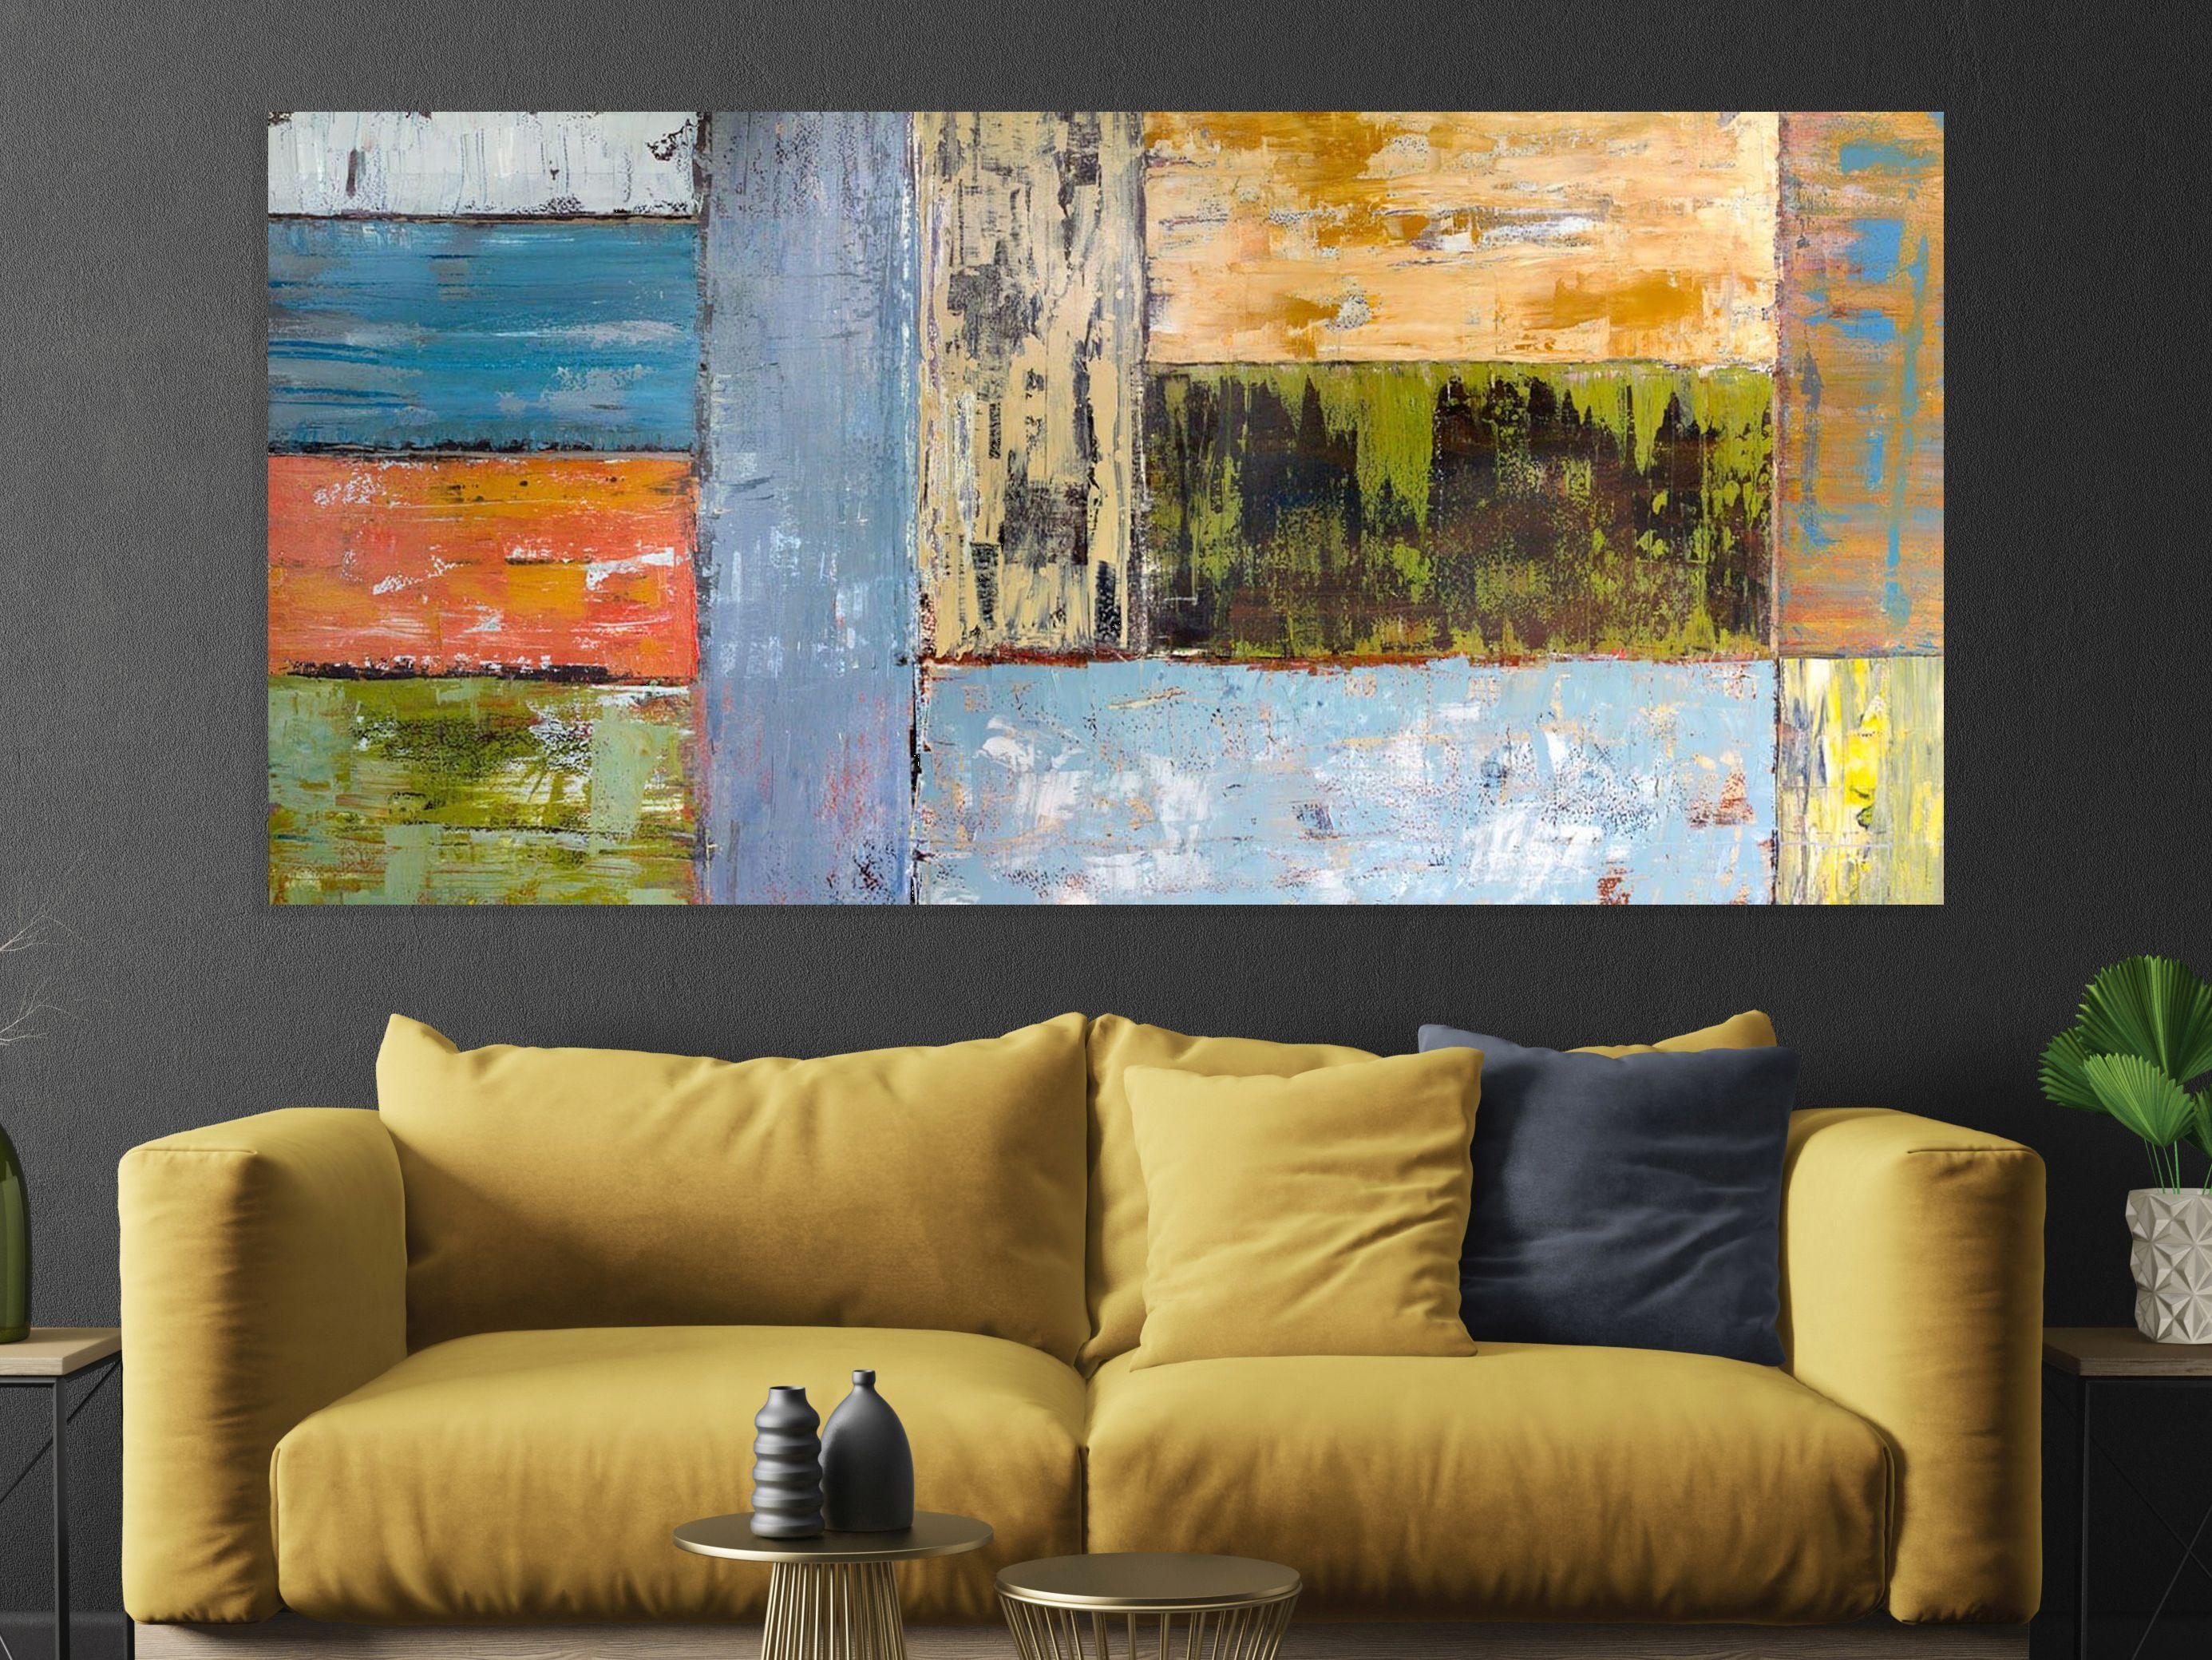 SPACES, Contemporary Blocks Fine Art on Giclee Canvas: 72